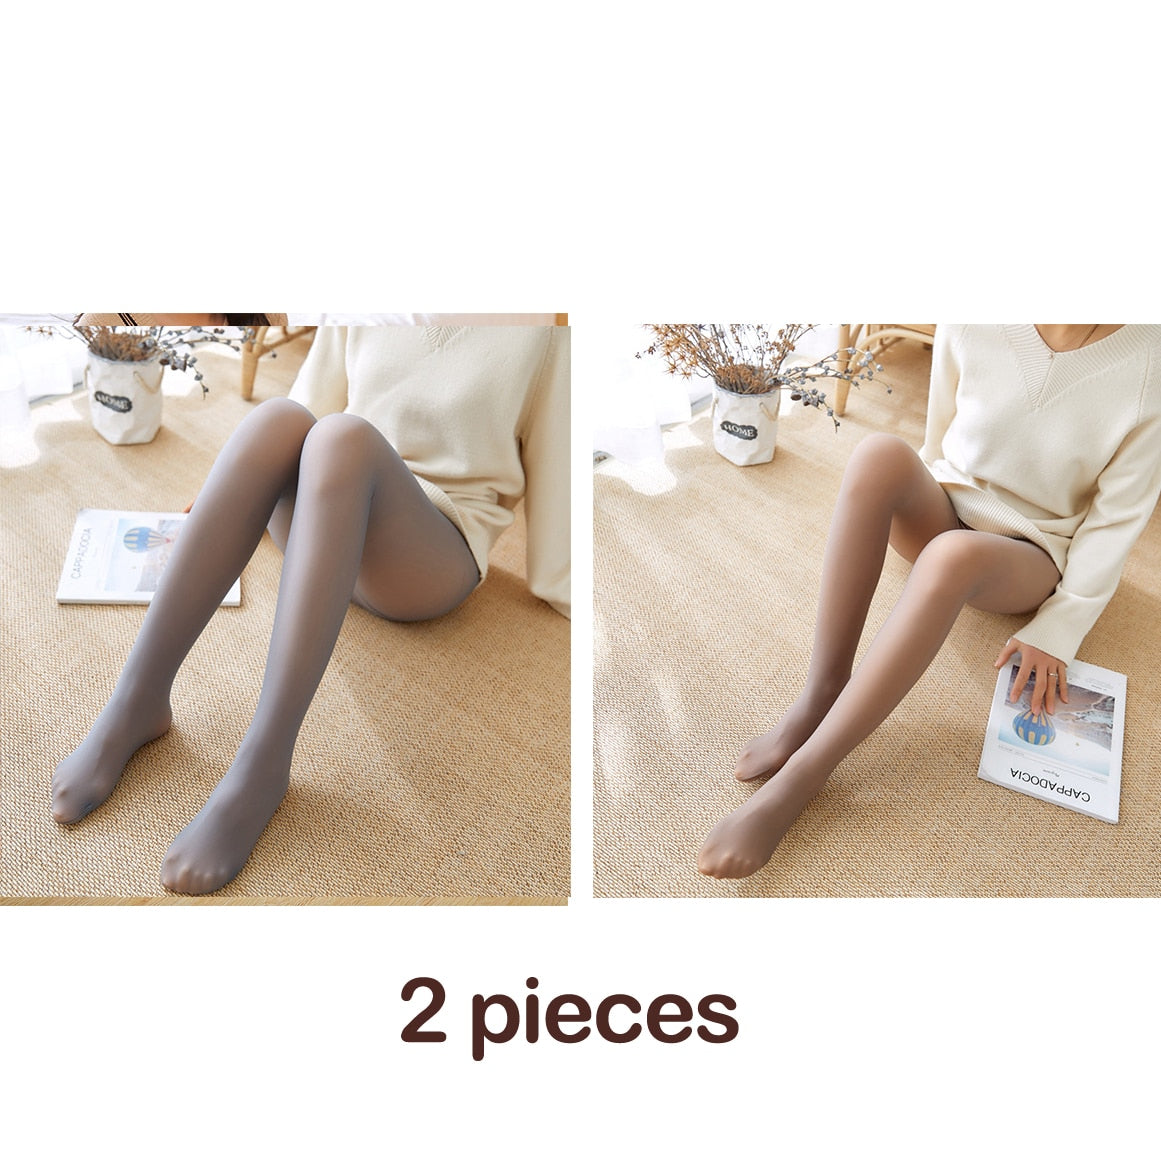 High Quality Women Tights Pantyhose Transparent